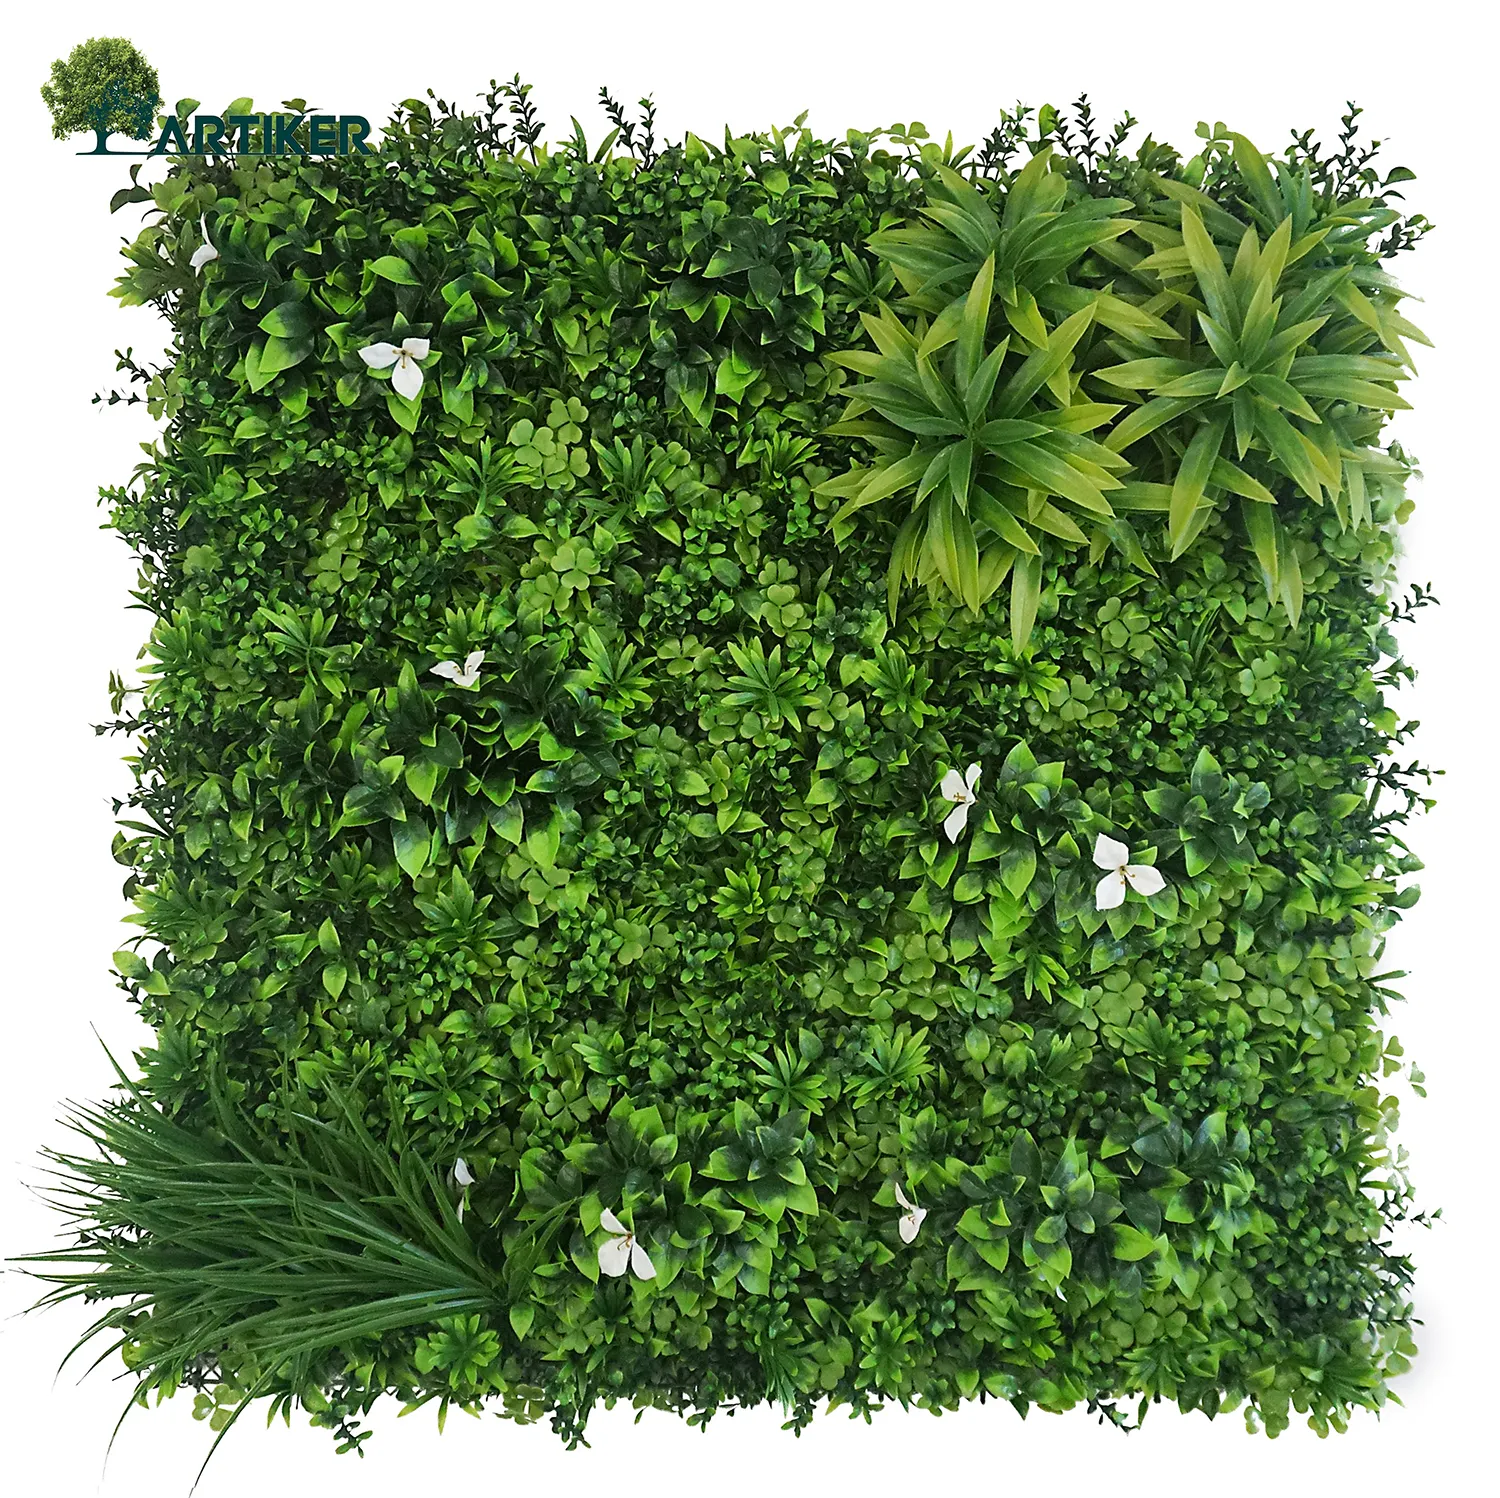 Outdoor green wall artificial Foliage artifical plants for wall decoration plant artificial plant wall